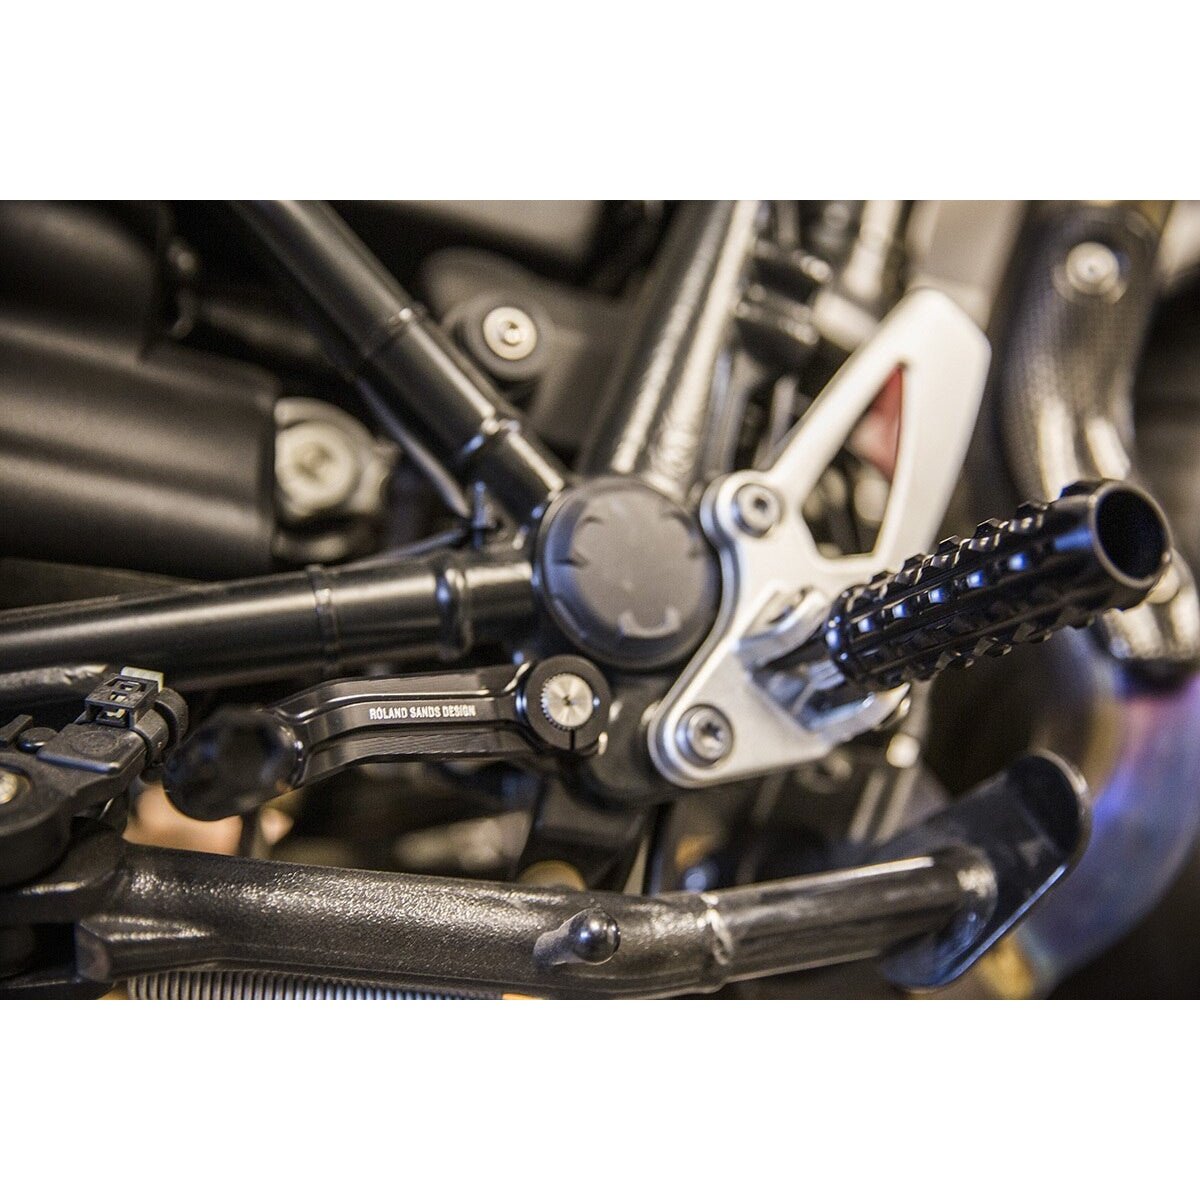 Foot Control Kit for BMW R nineT